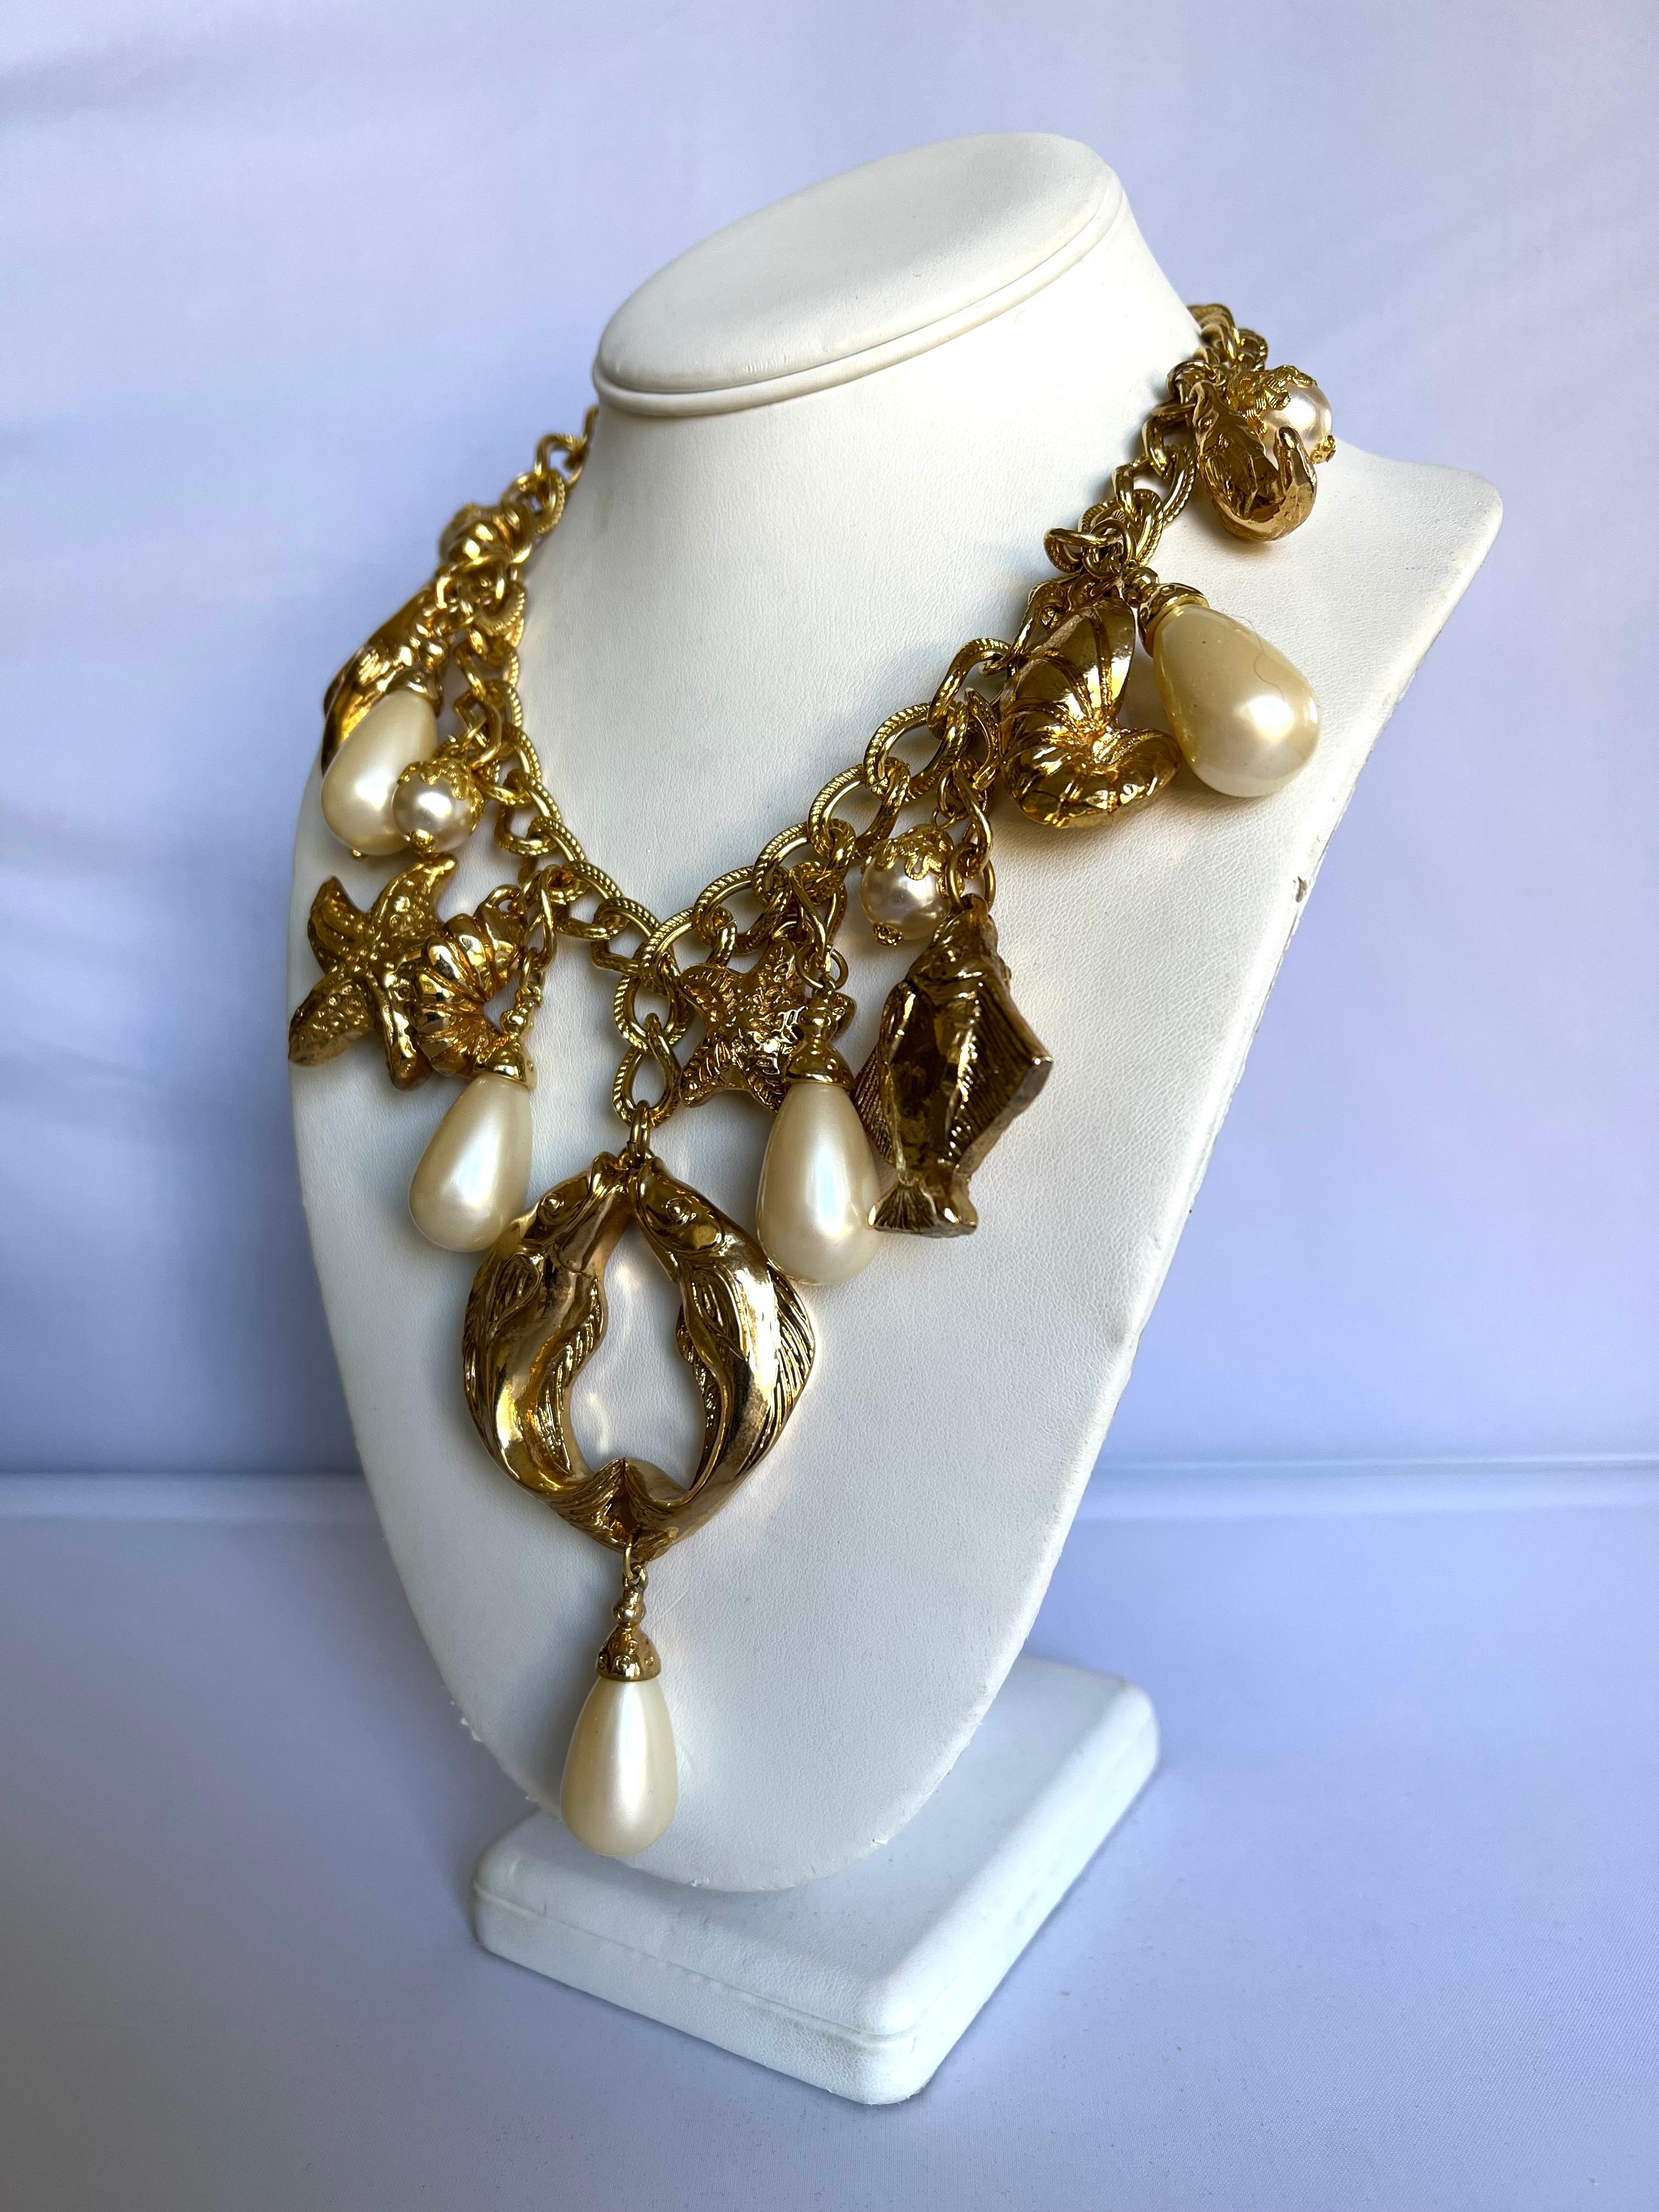 Vintage French nautical charm necklace, comprised out of a thick gilt metal chain adorned by a plethora of fish, seashells, and pearls circa 1980 by Chantal de Kerouartz. The necklace is also featured in the August issue of Vogue Spain.